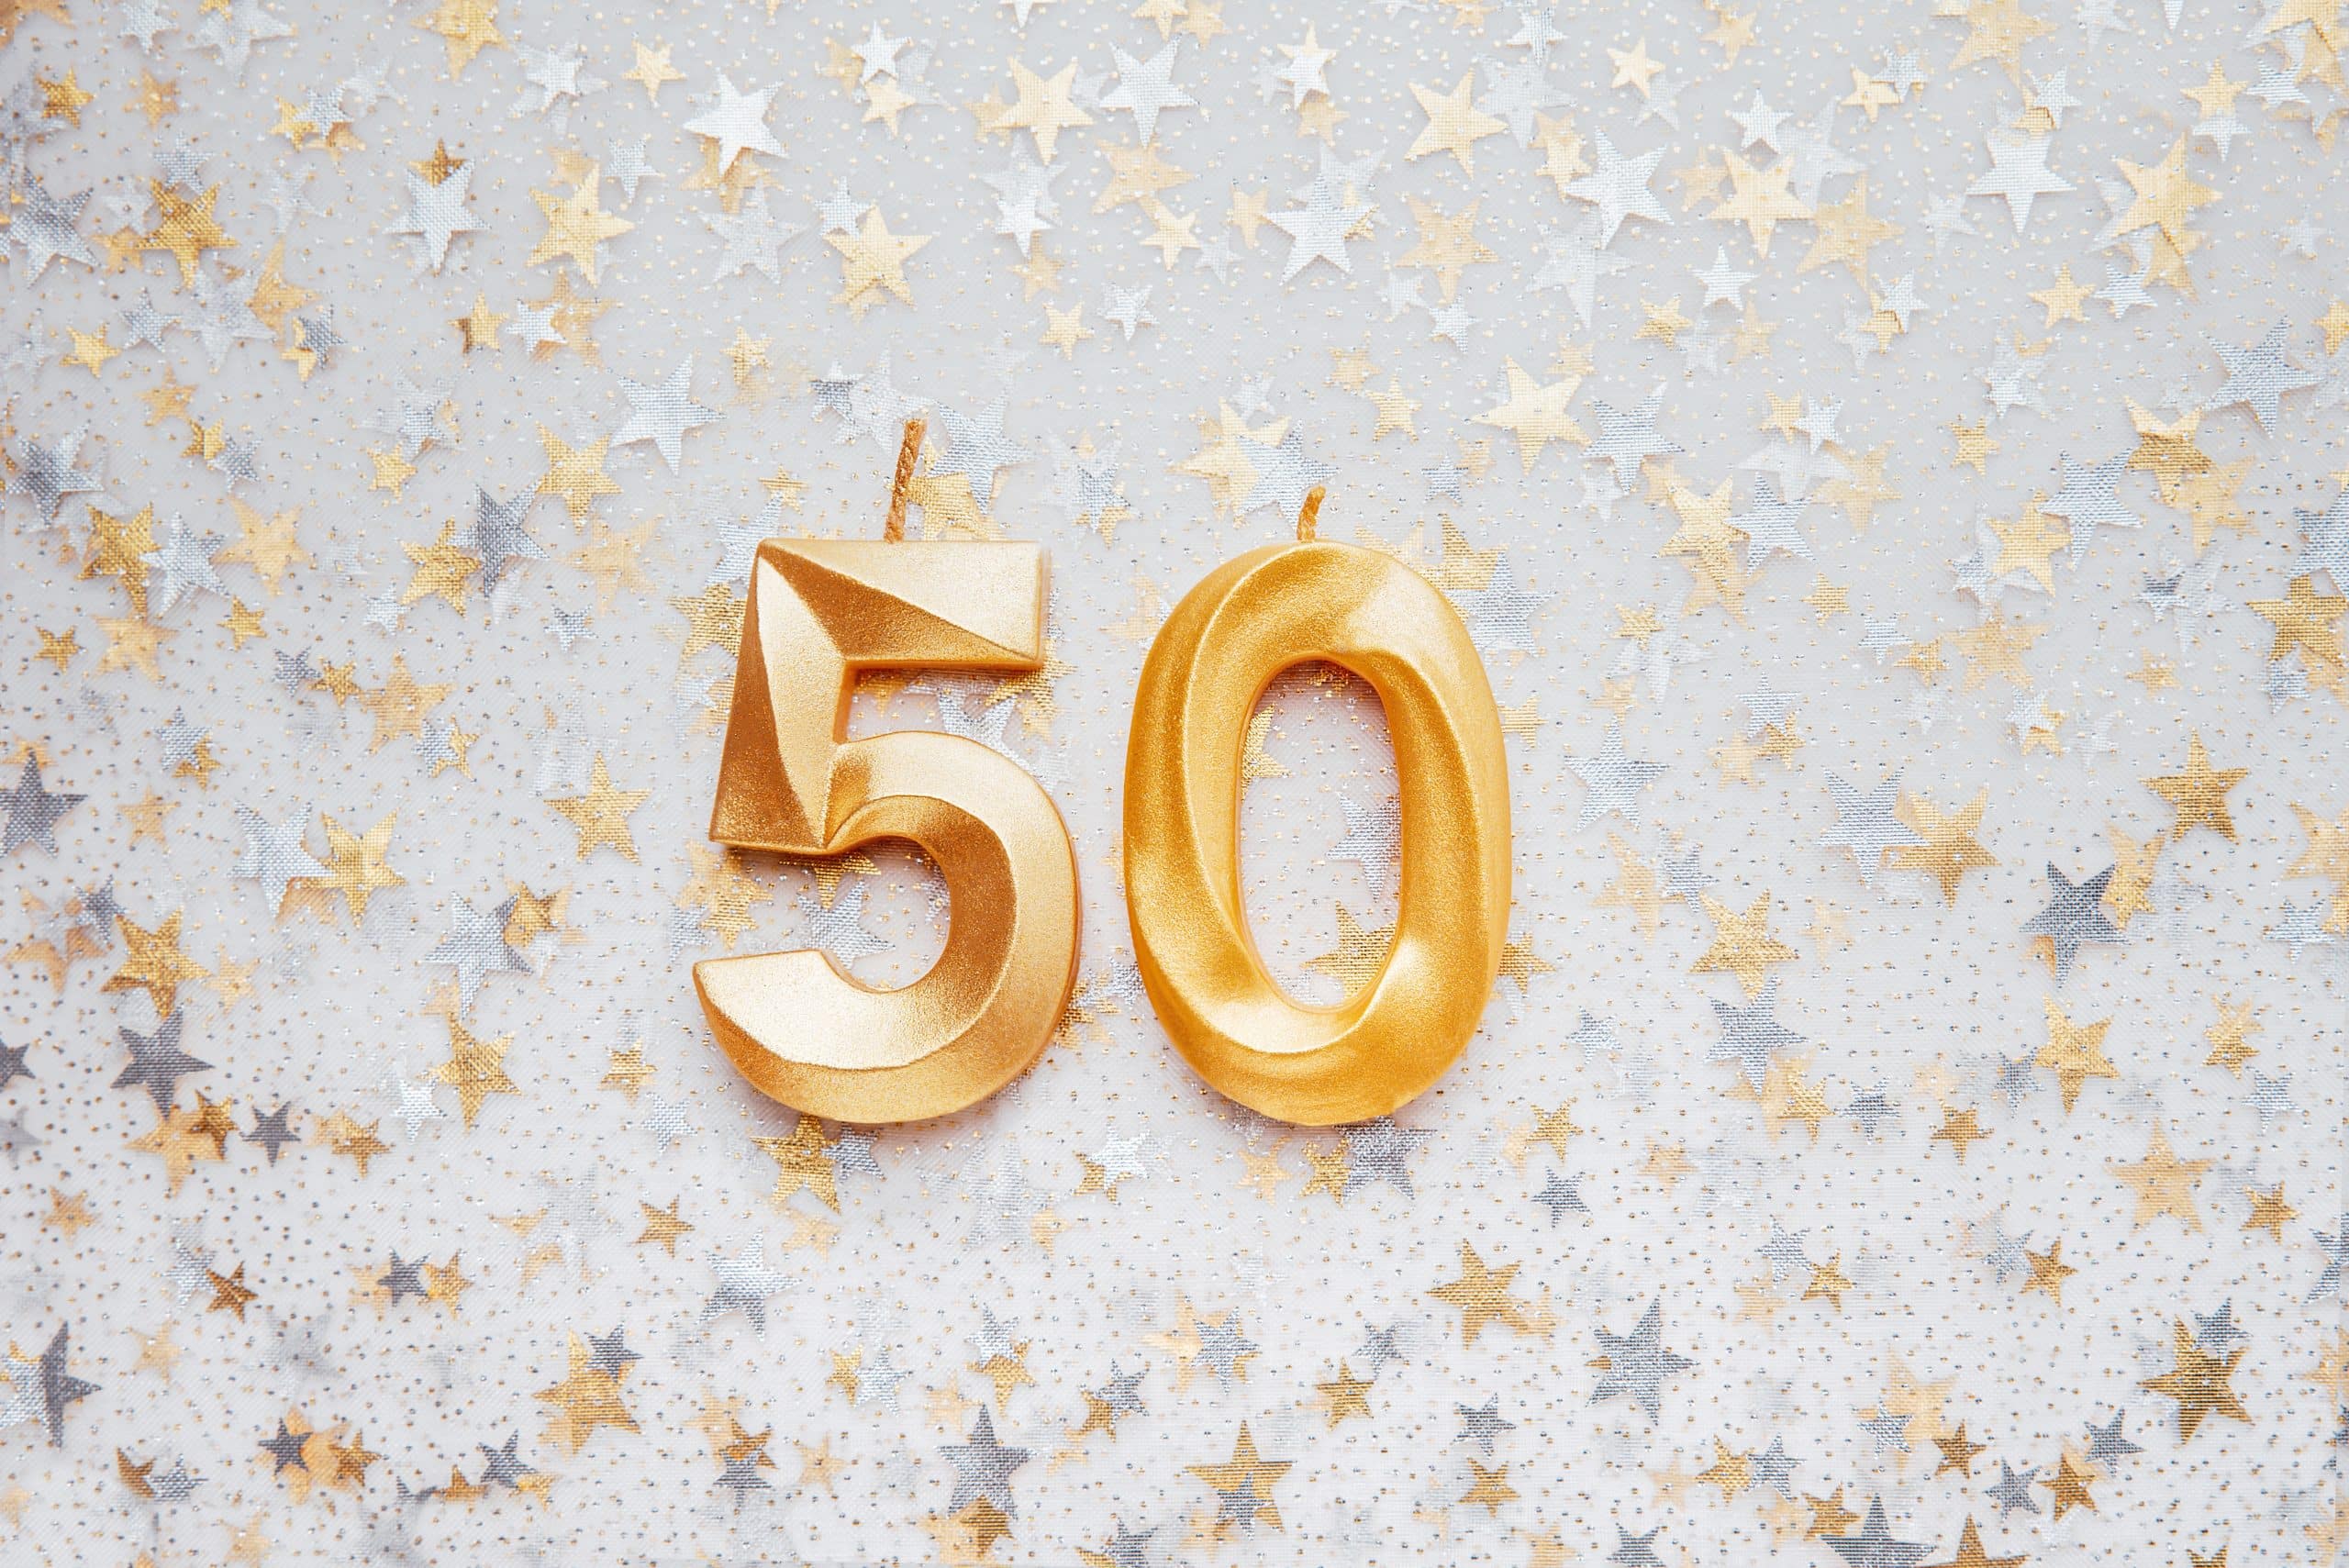 Number 50 fifty golden celebration birthday candle on Festive Background. Ten years birthday. concept of celebrating birthday, anniversary, important date, holiday